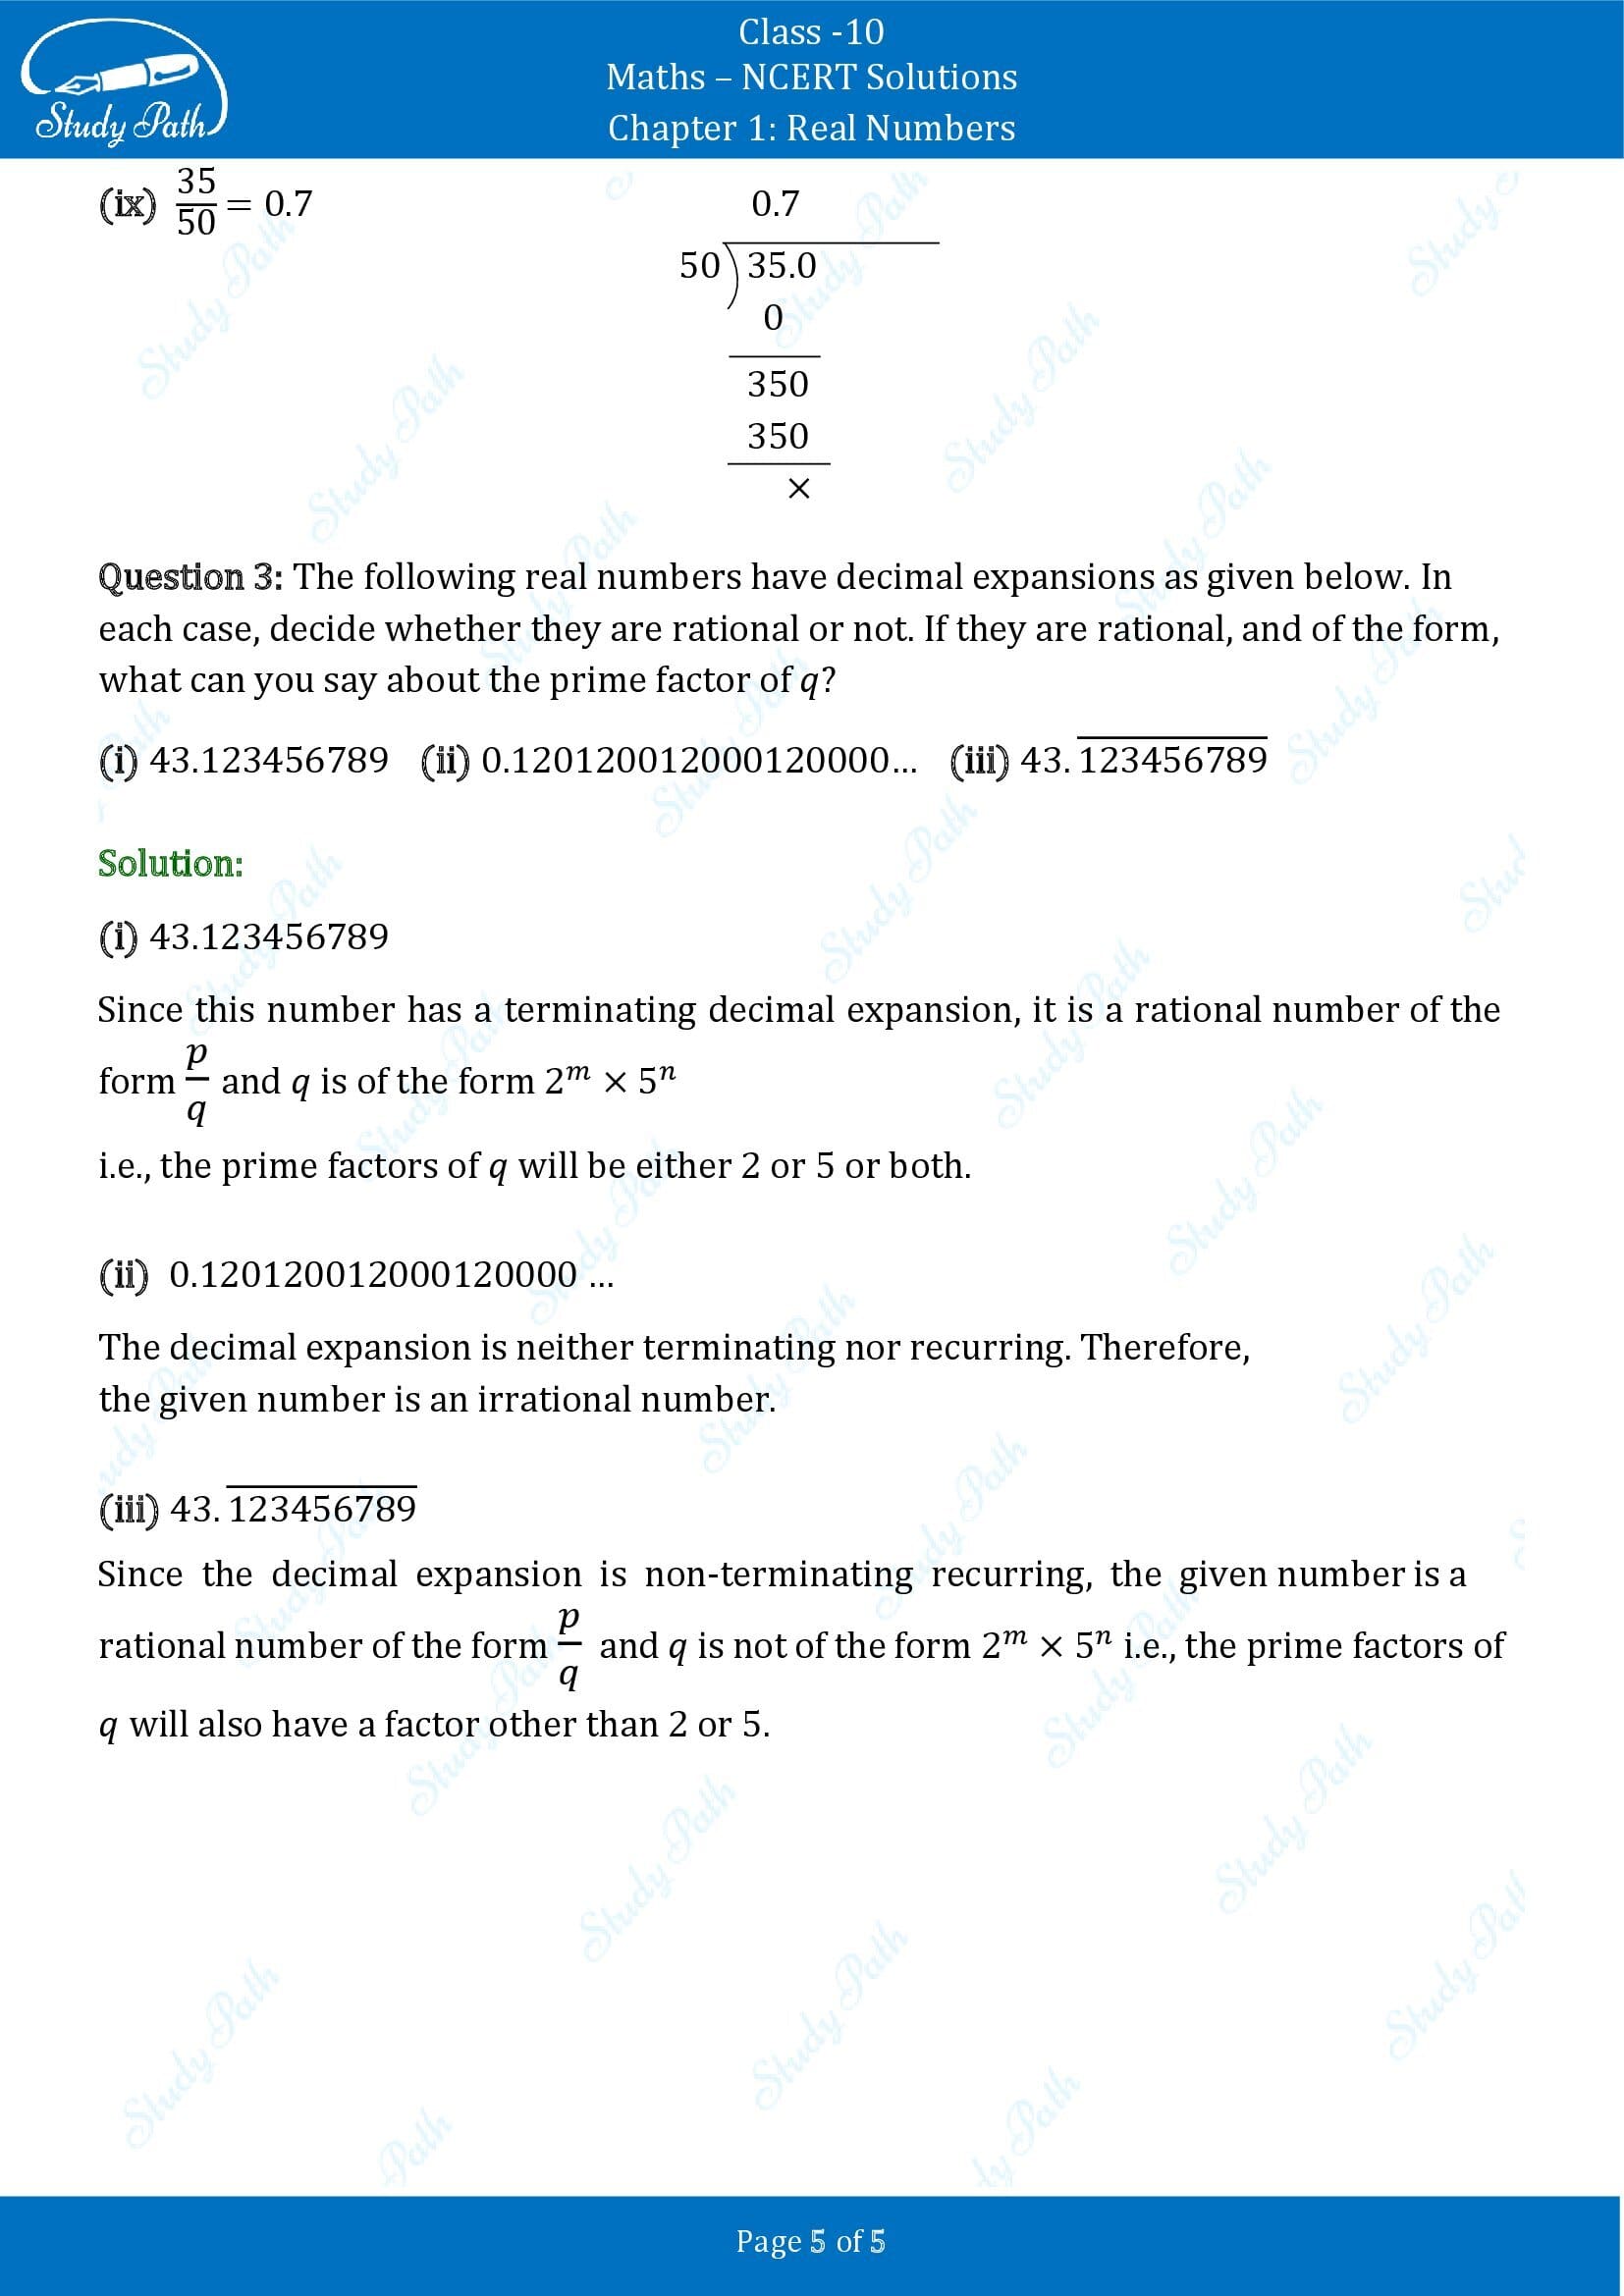 NCERT Solutions for Class 10 Maths Chapter 1 Real Numbers Exercise 1.4 00005